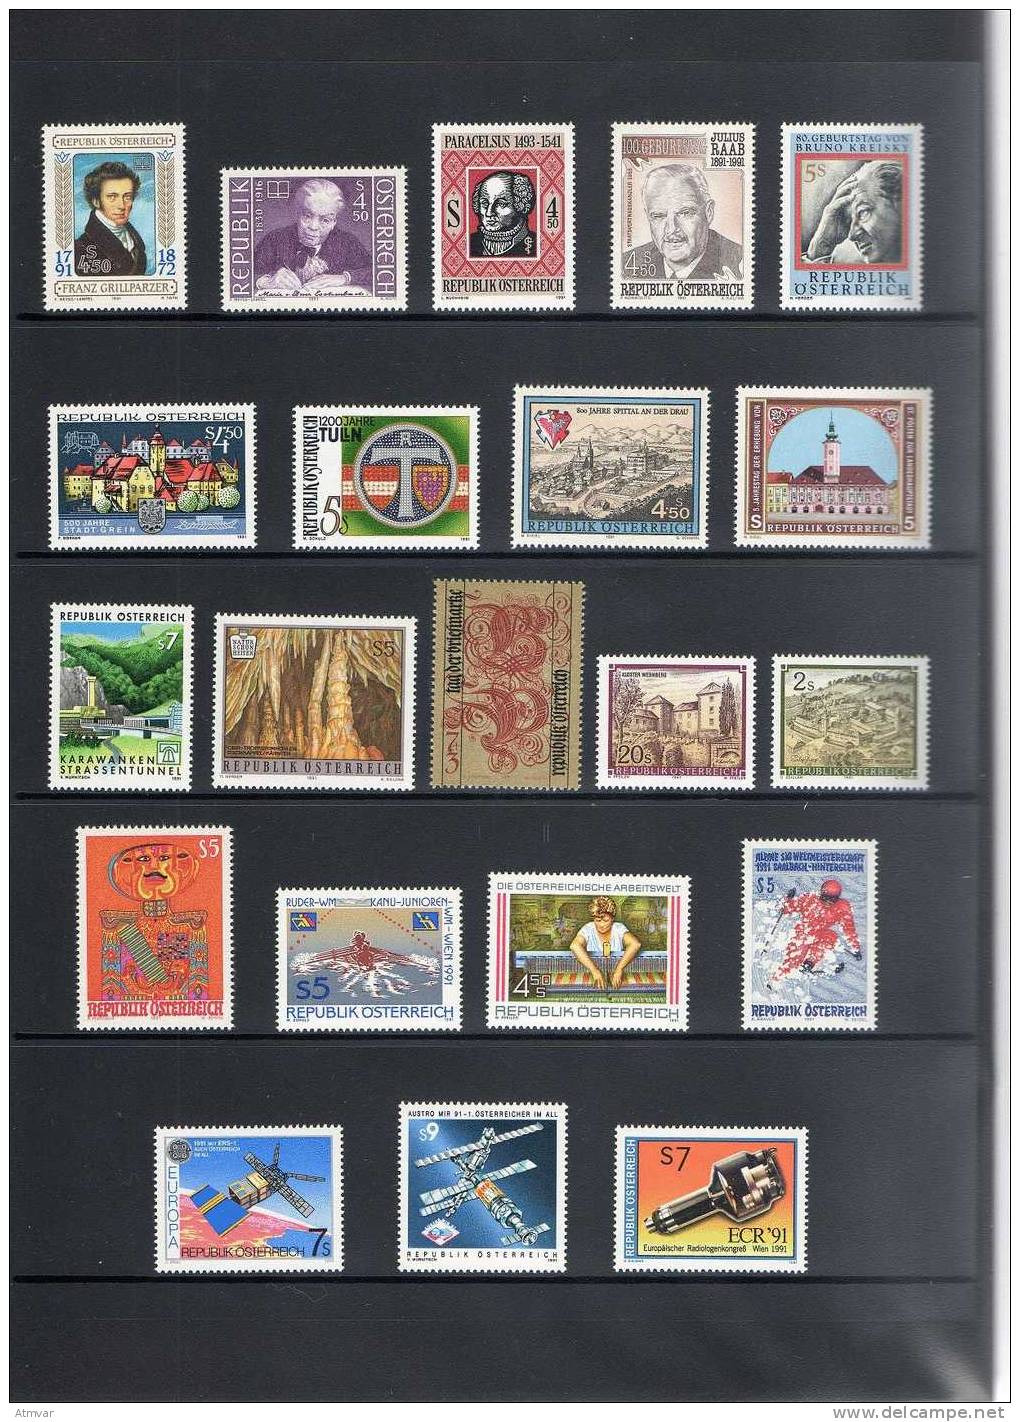 AT502. AUSTRIA - Yearbook 1991 With Mint Stamps / Livre Annuel 1991 Avec Timbres Neufs - Annate Complete